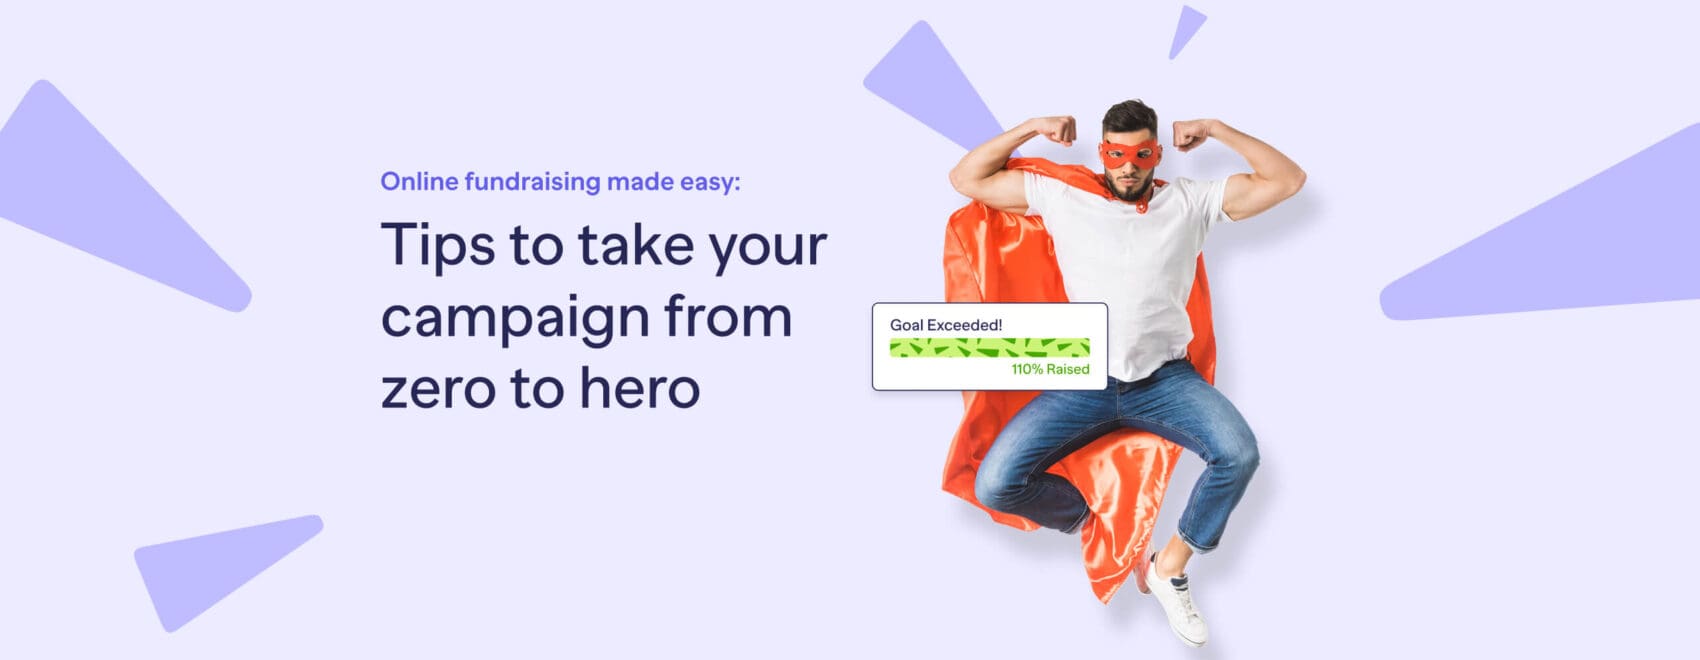 Online fundraising made easy tips to take your campaign from zero to hero